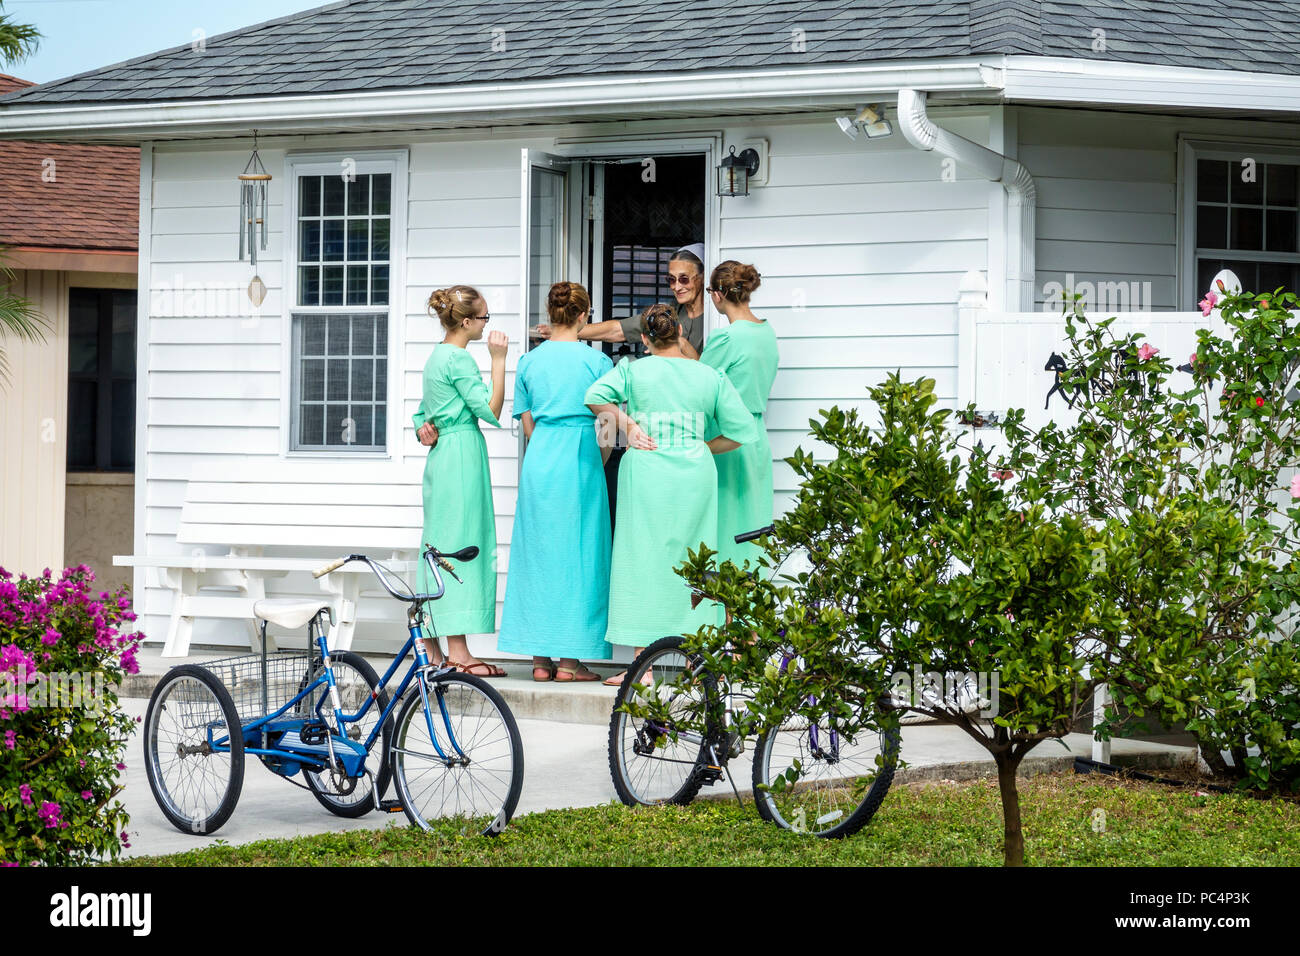 Sarasota Florida,Pinecraft Pine Craft Amish Mennonite community,house home teen teens teenagers girls friends visiting neighbor bicycles tricycle Stock Photo